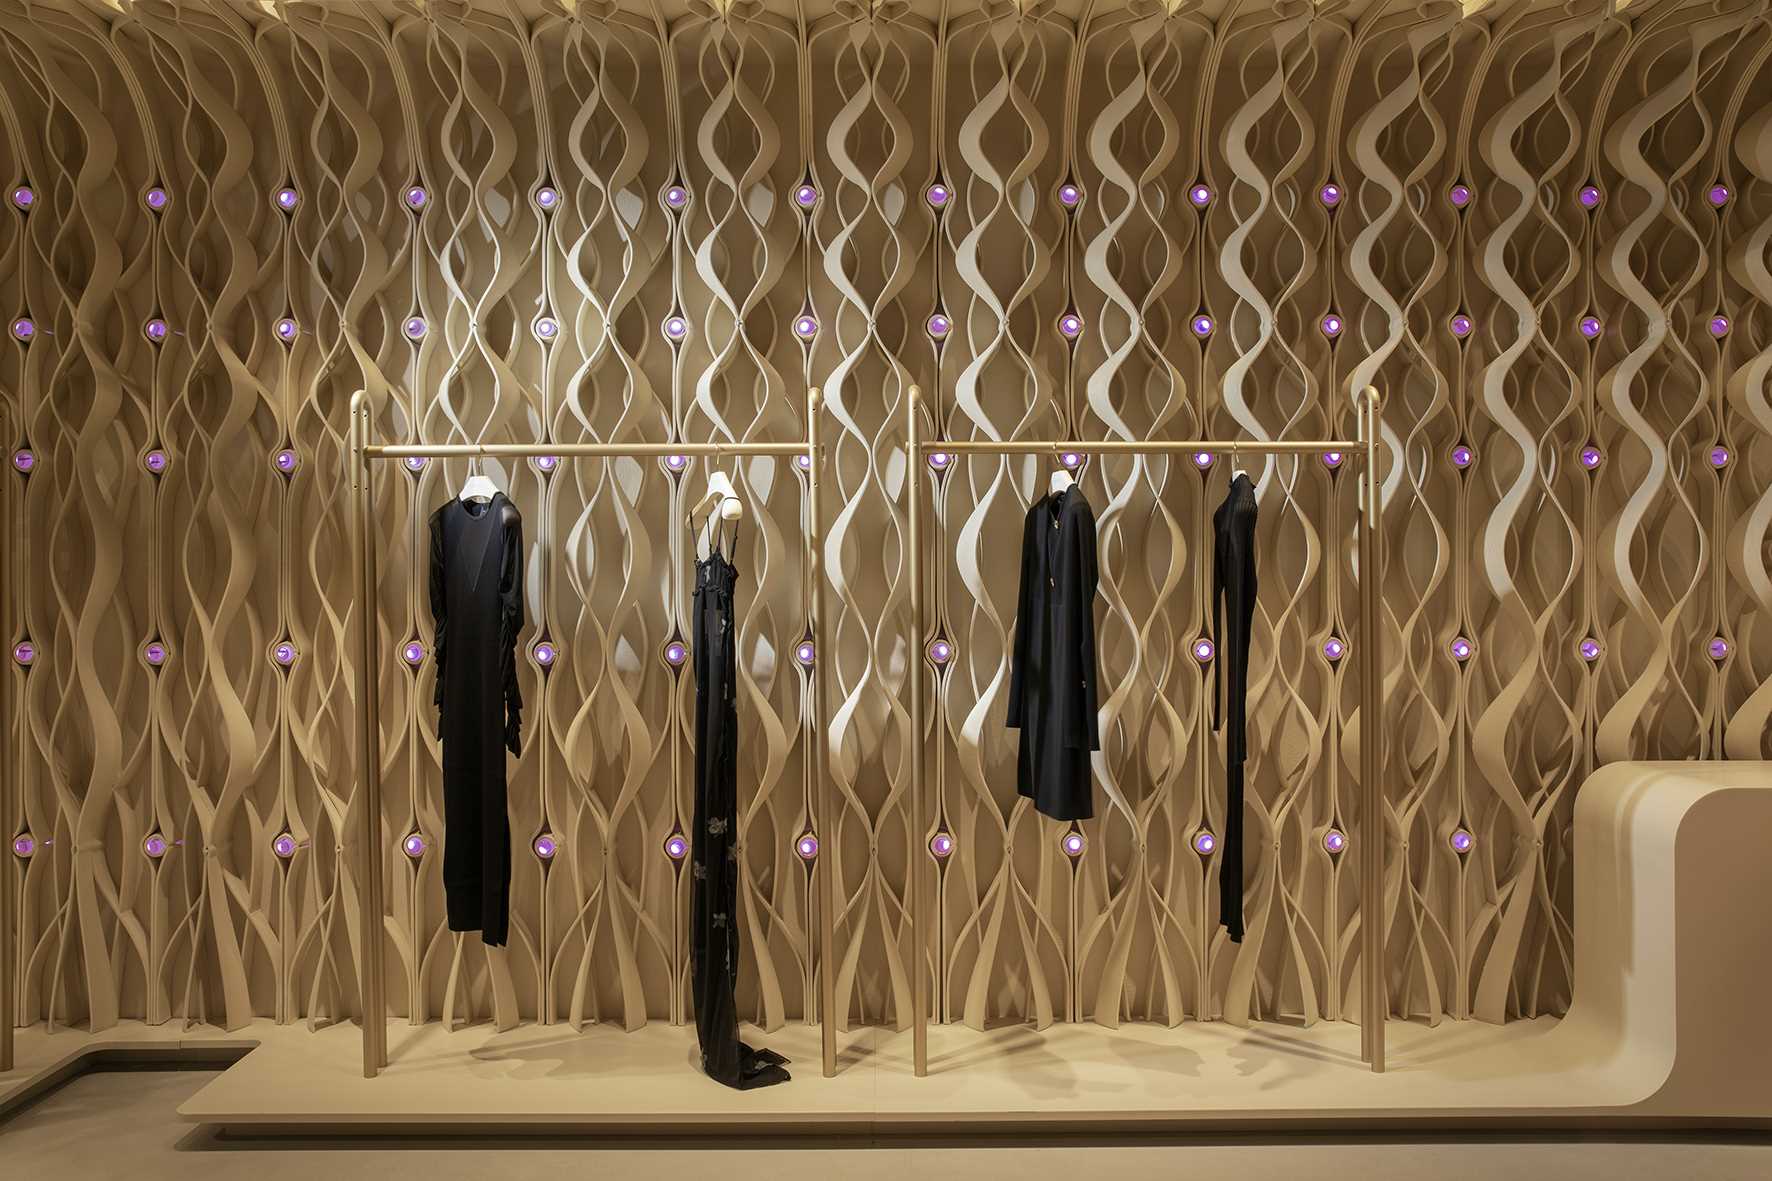 A modern retail store with 3D-printed design elements that line the walls.